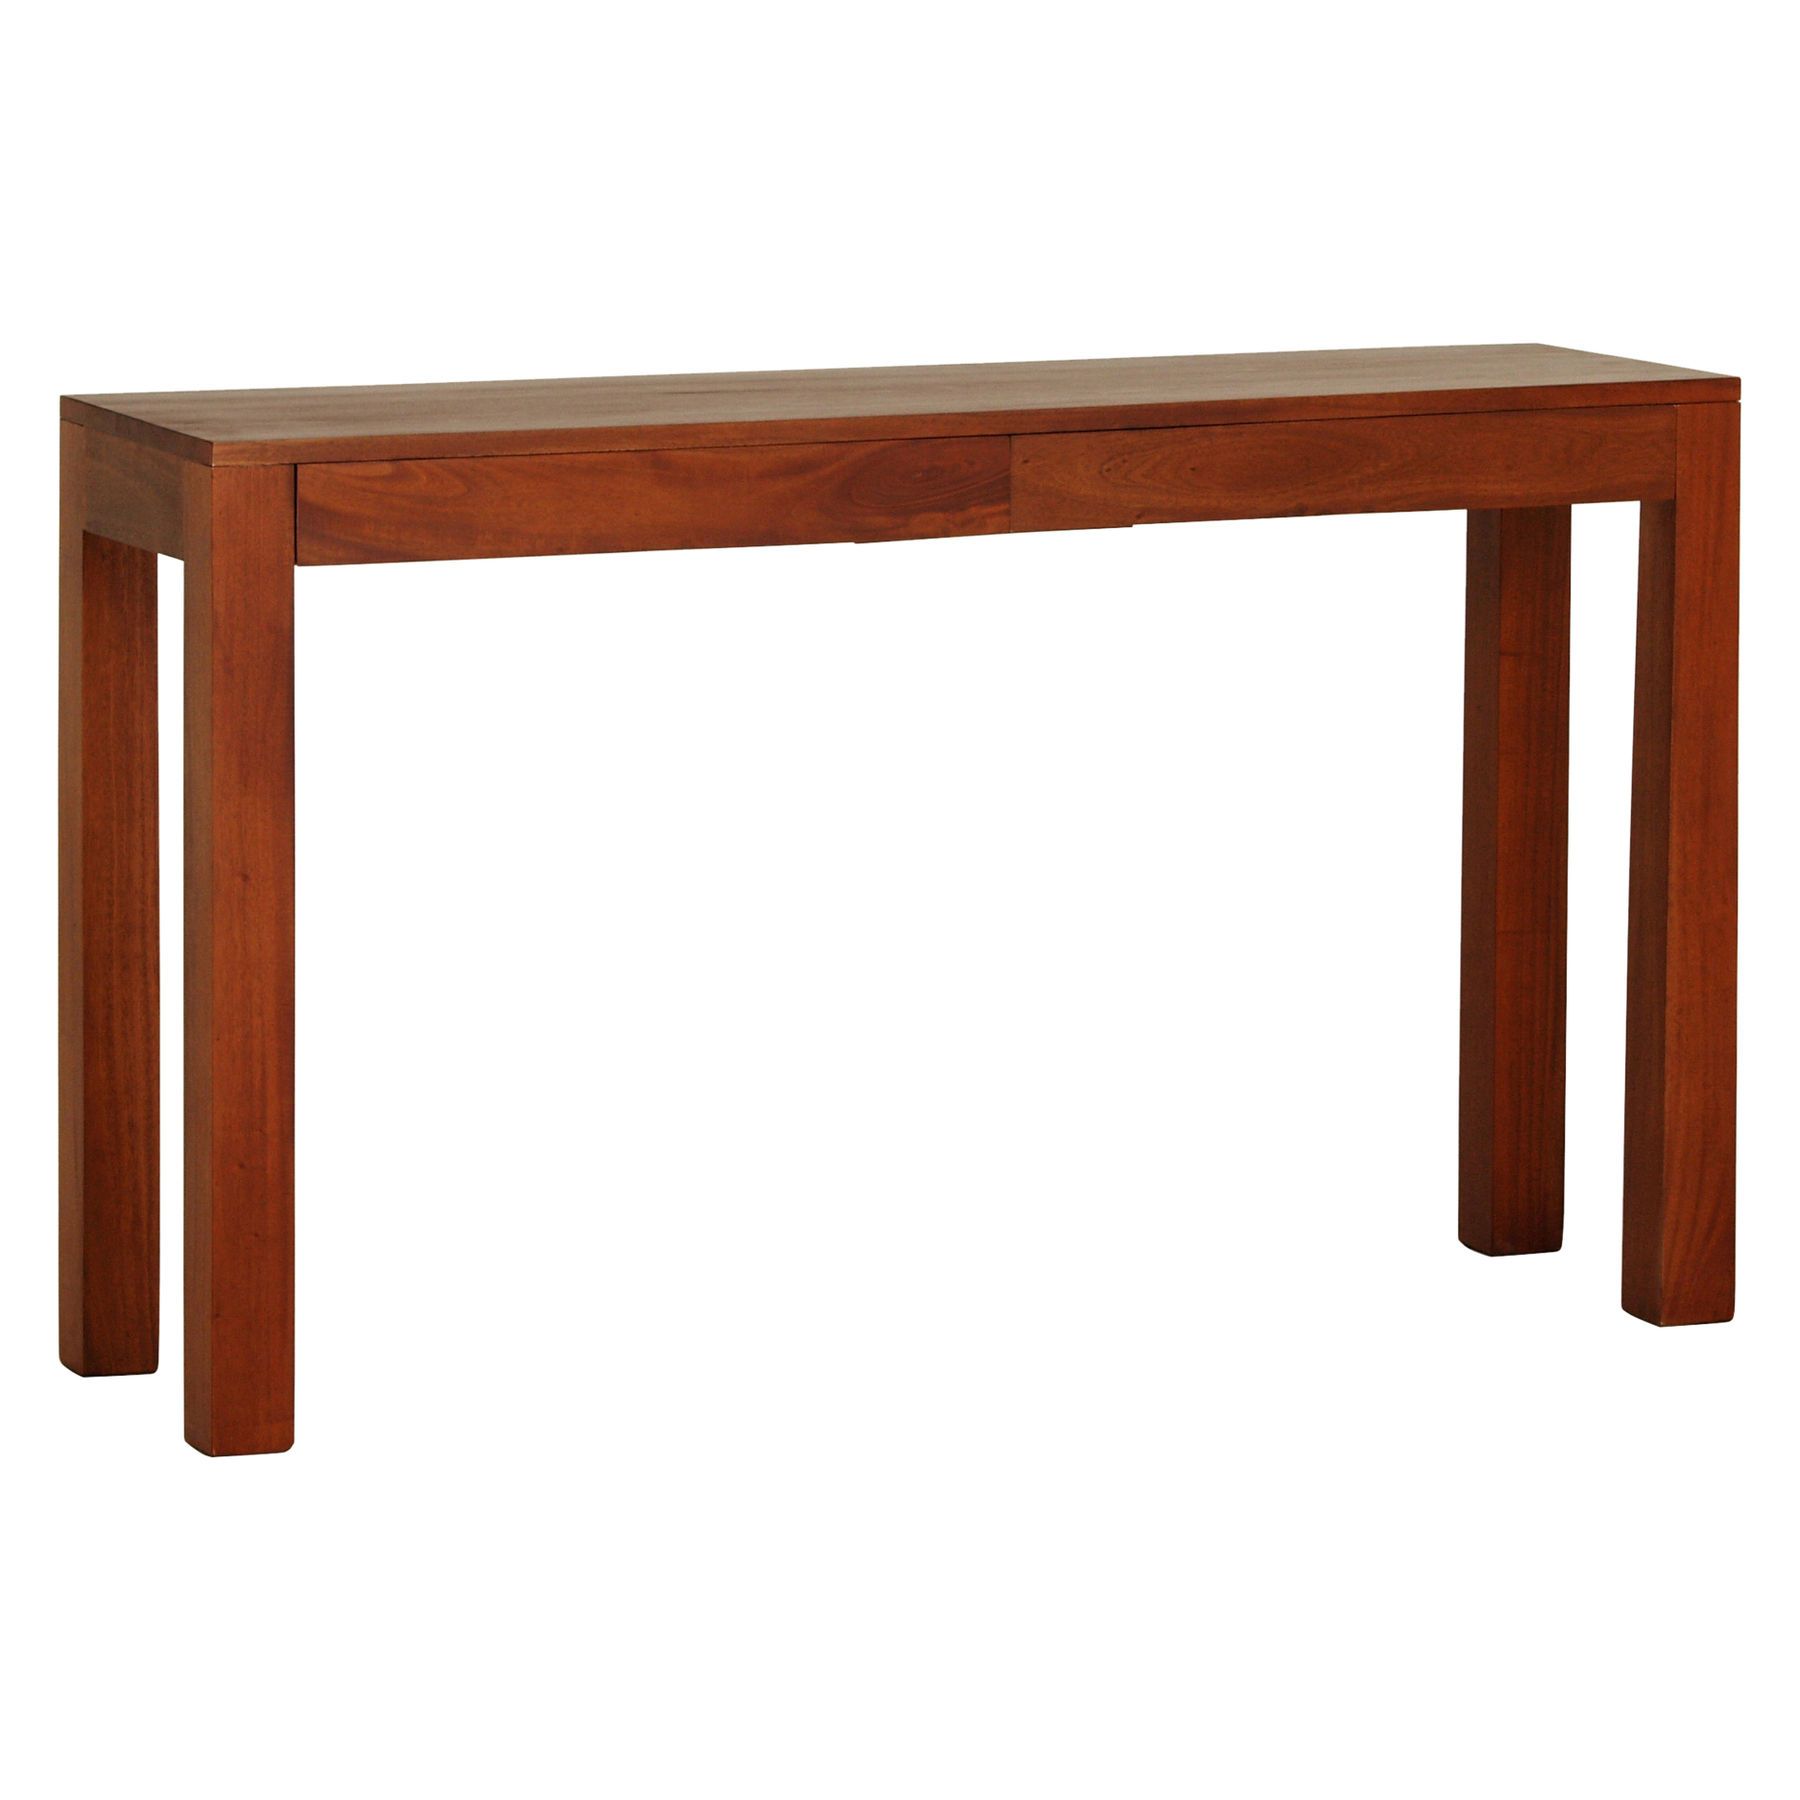 Hague 2 Drawer Timber Console Table, Pecankayu Estate | Zanui With Regard To Warm Pecan Console Tables (View 10 of 20)